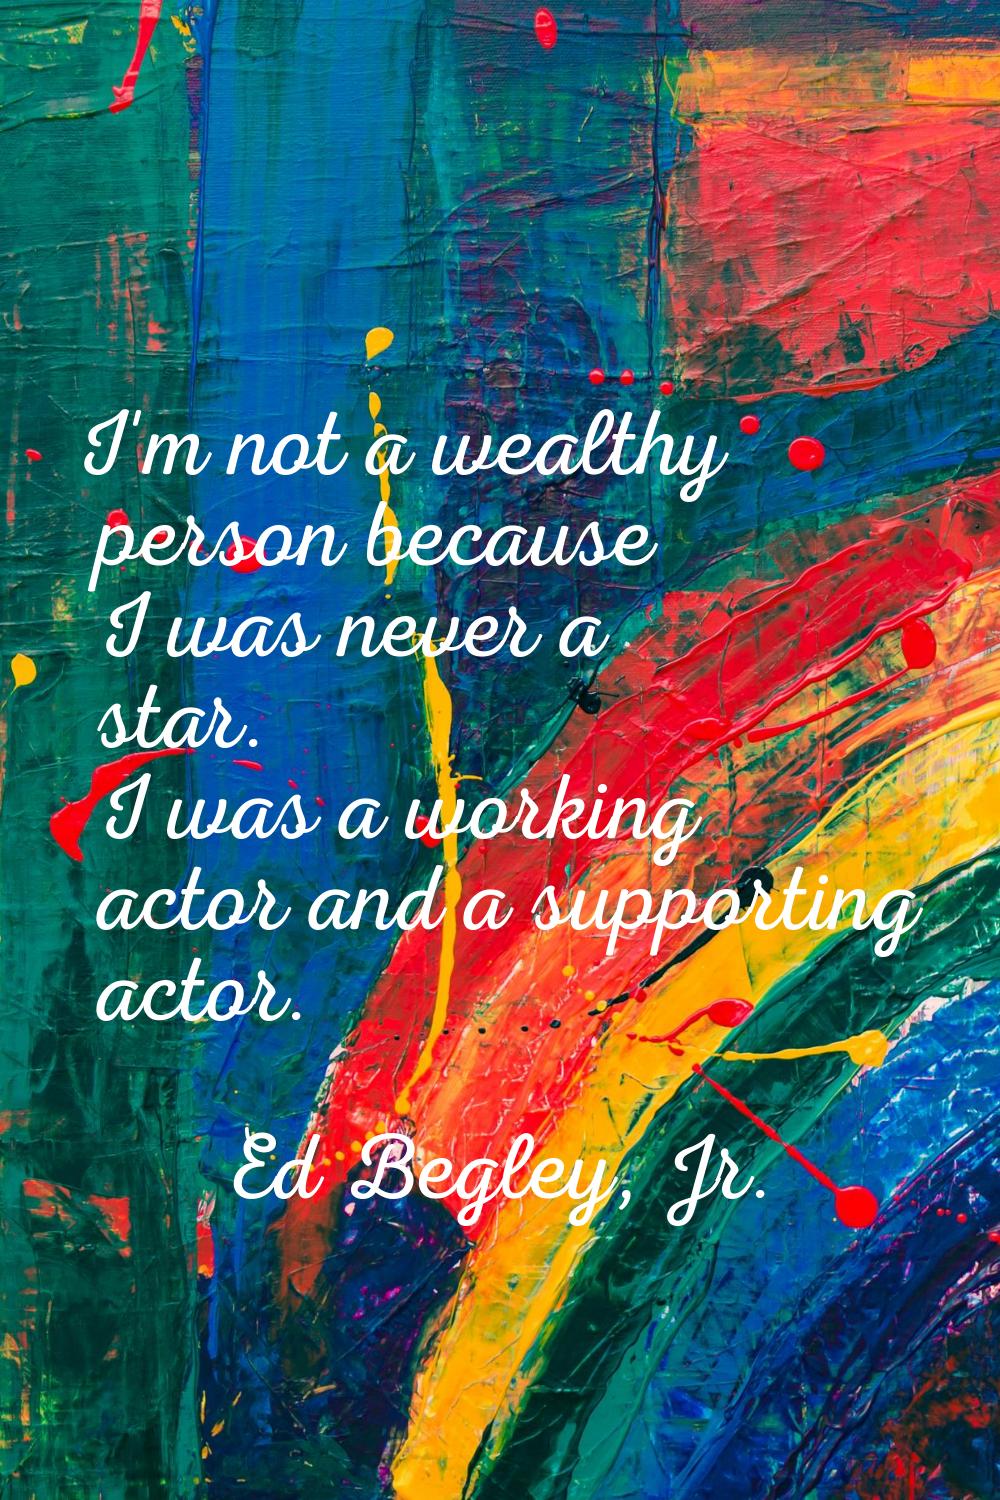 I'm not a wealthy person because I was never a star. I was a working actor and a supporting actor.